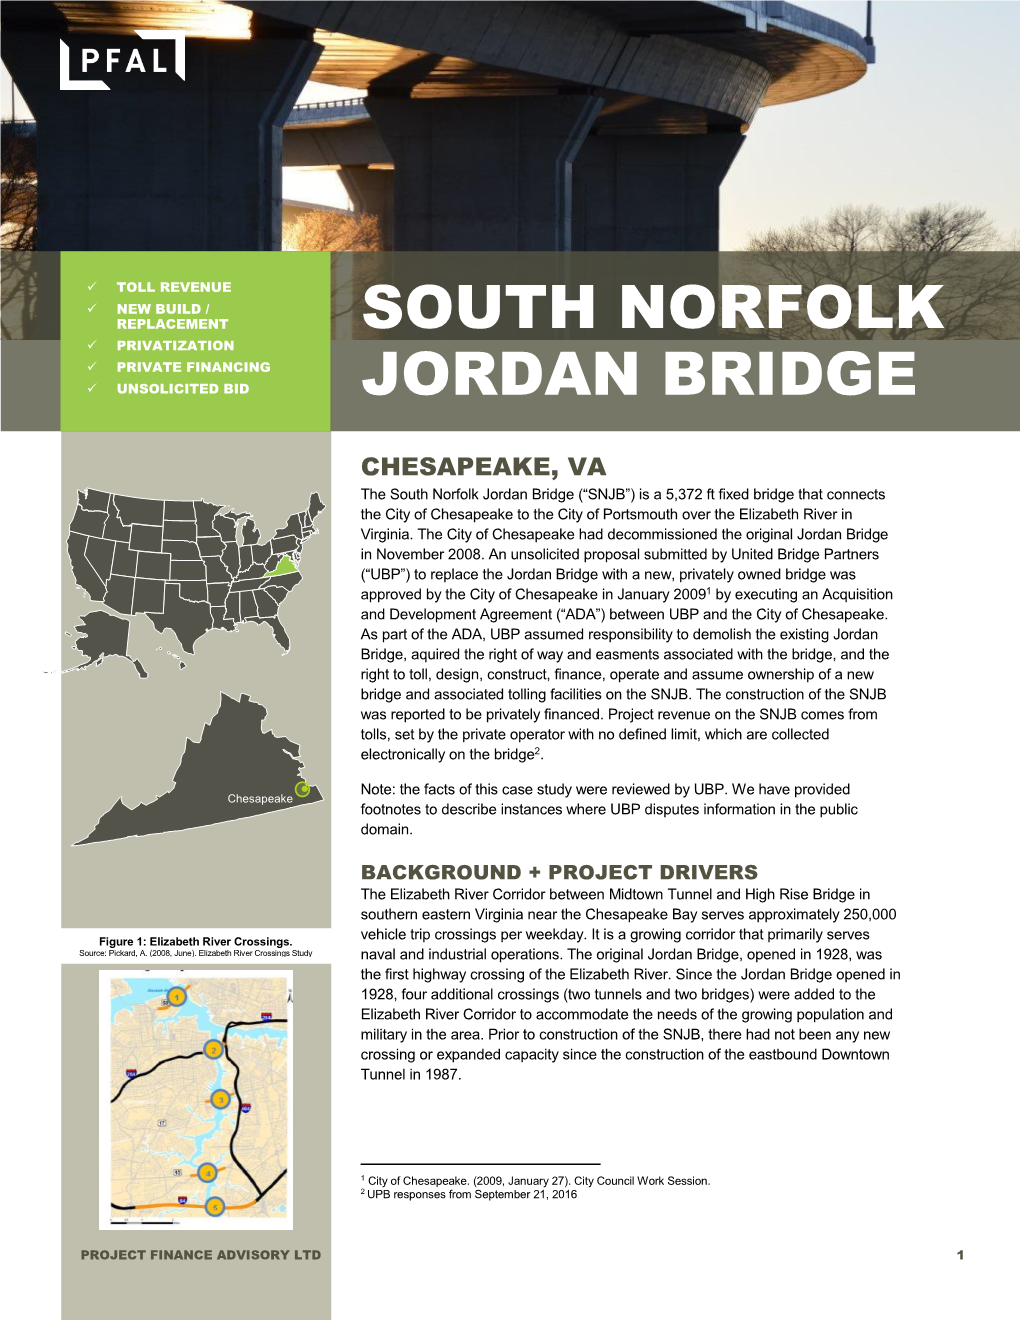 South Norfolk Jordan Bridge (“SNJB”) Is a 5,372 Ft Fixed Bridge That Connects the City of Chesapeake to the City of Portsmouth Over the Elizabeth River In